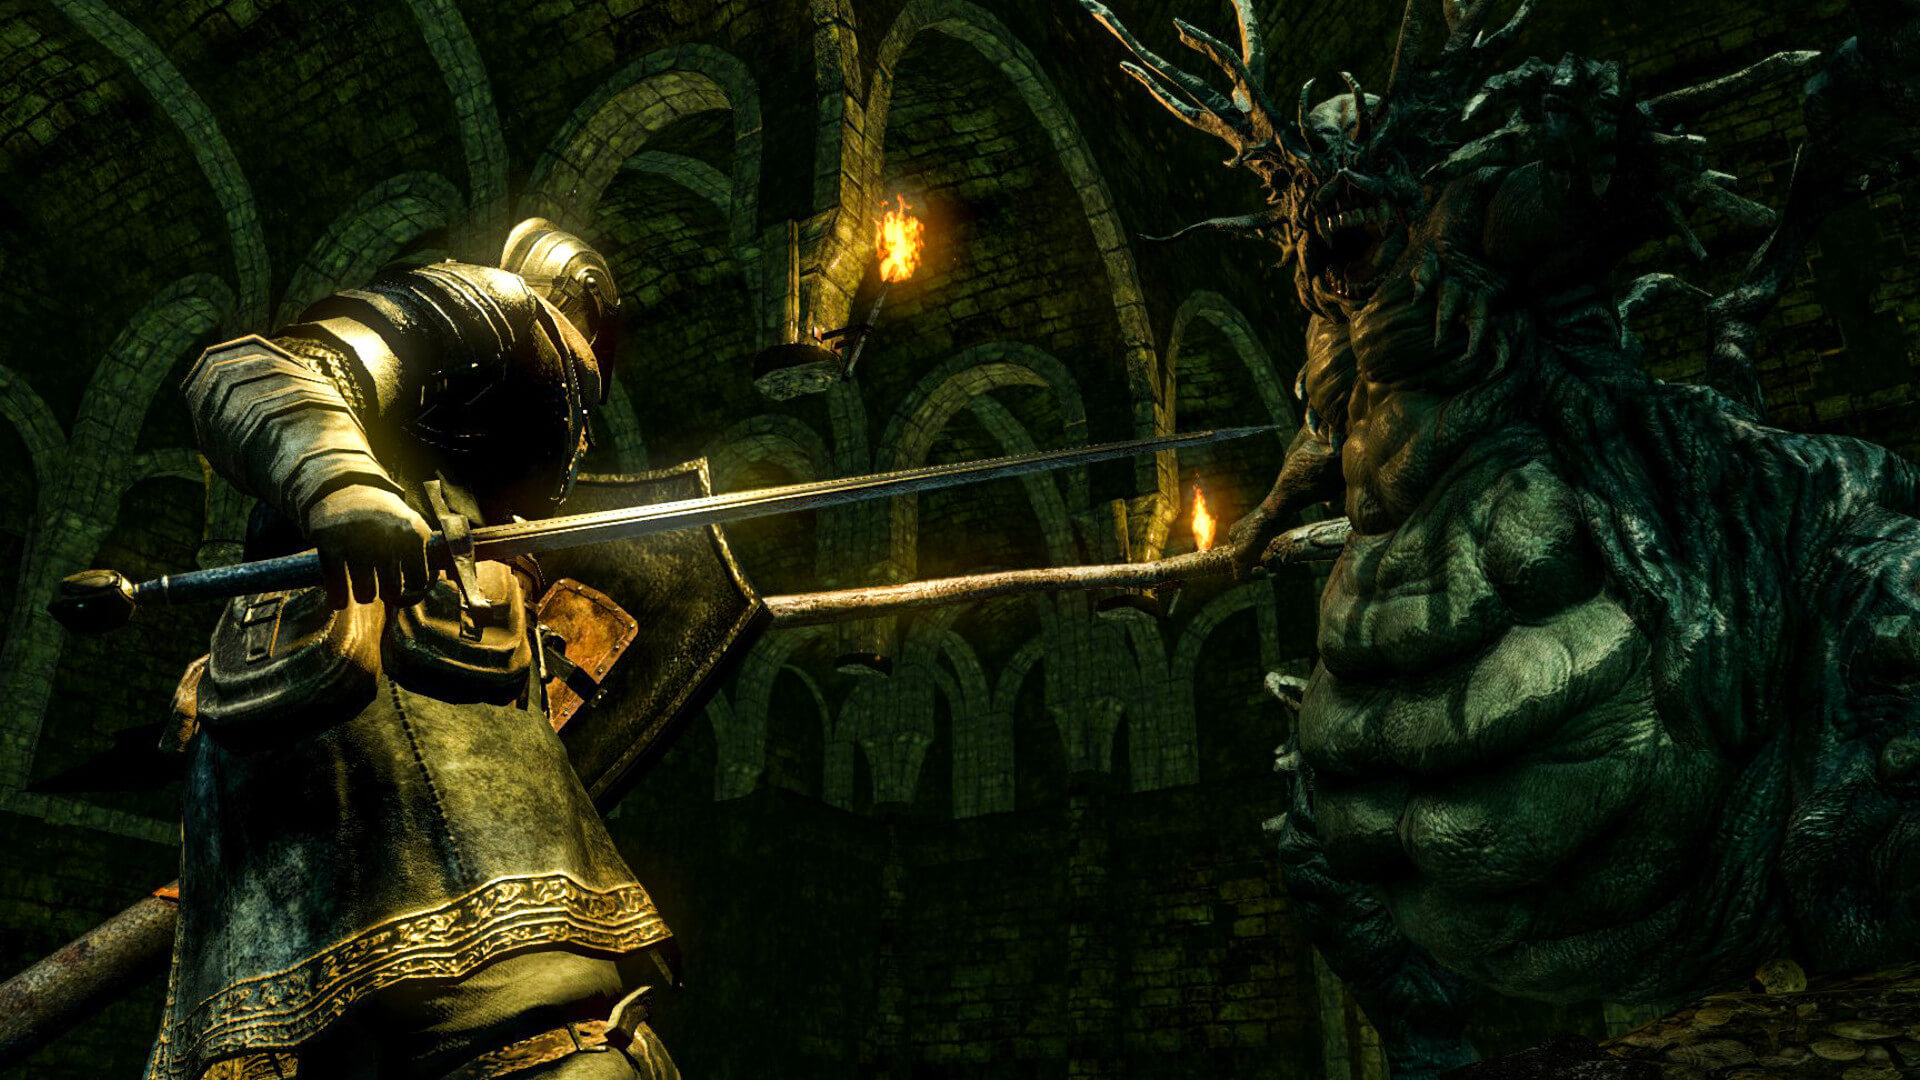 The player fighting the Stray Demon in Dark Souls